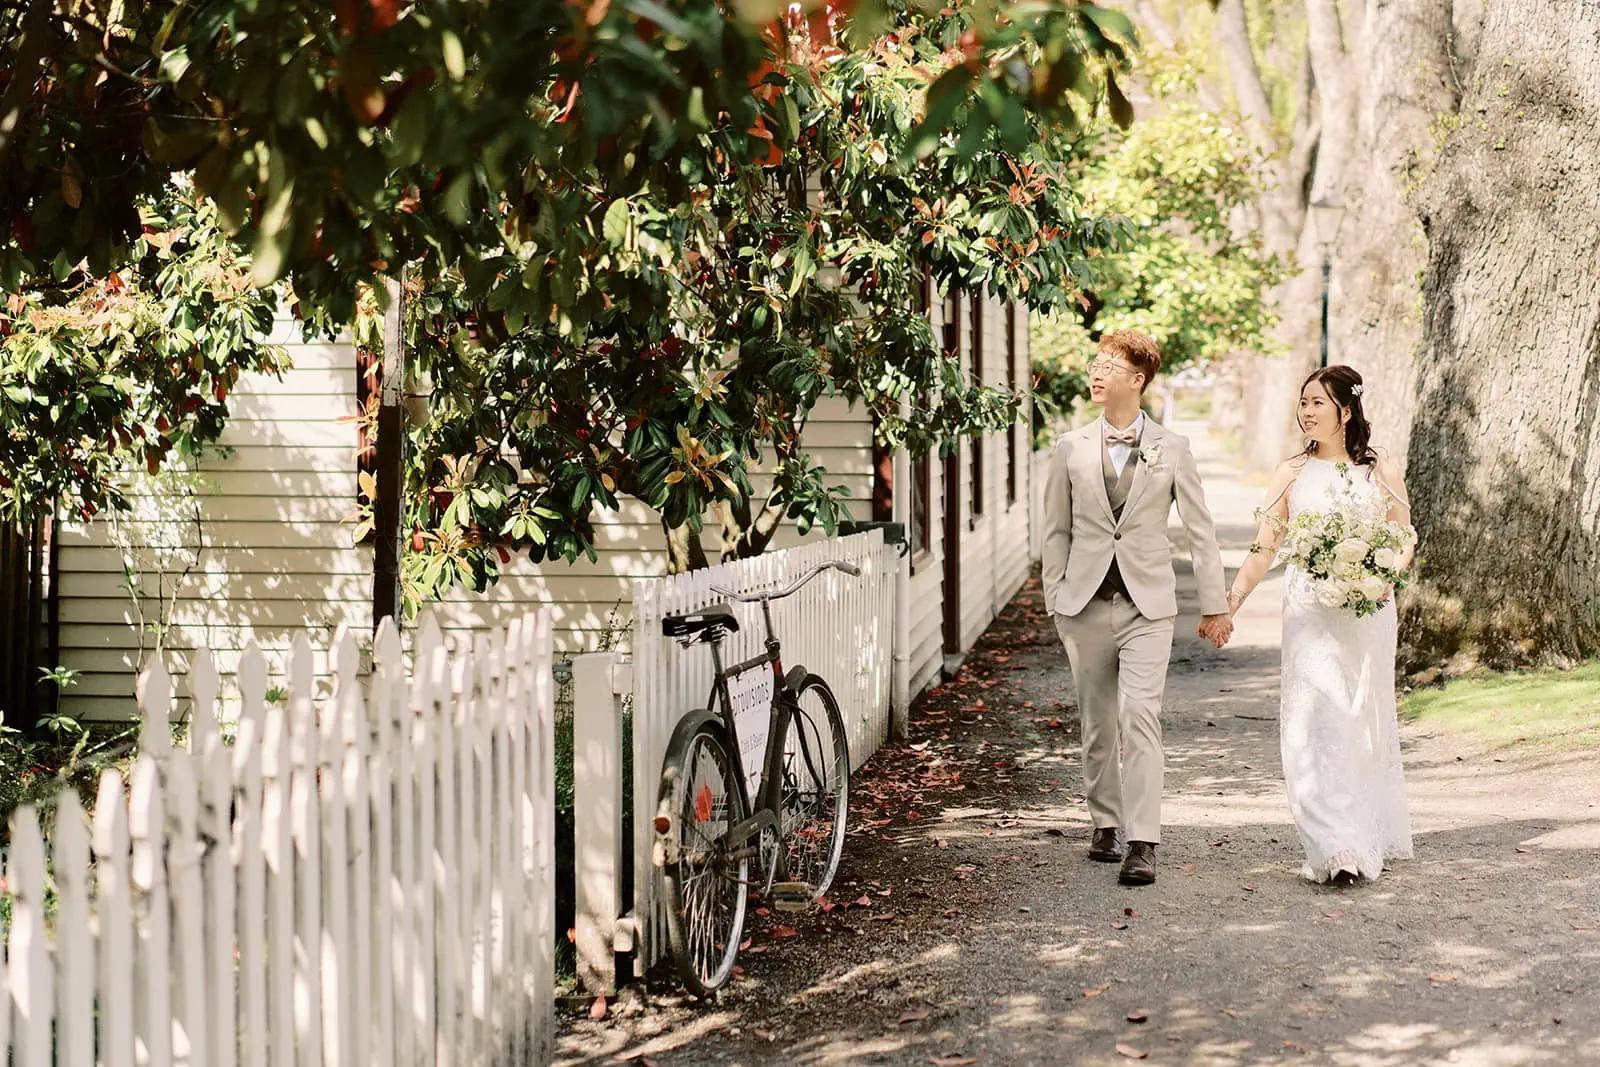 Queenstown New Zealand Elopement Wedding Photographer - A summer bride and groom walking down a street in Queenstown accompanied by a bicycle as their guide.